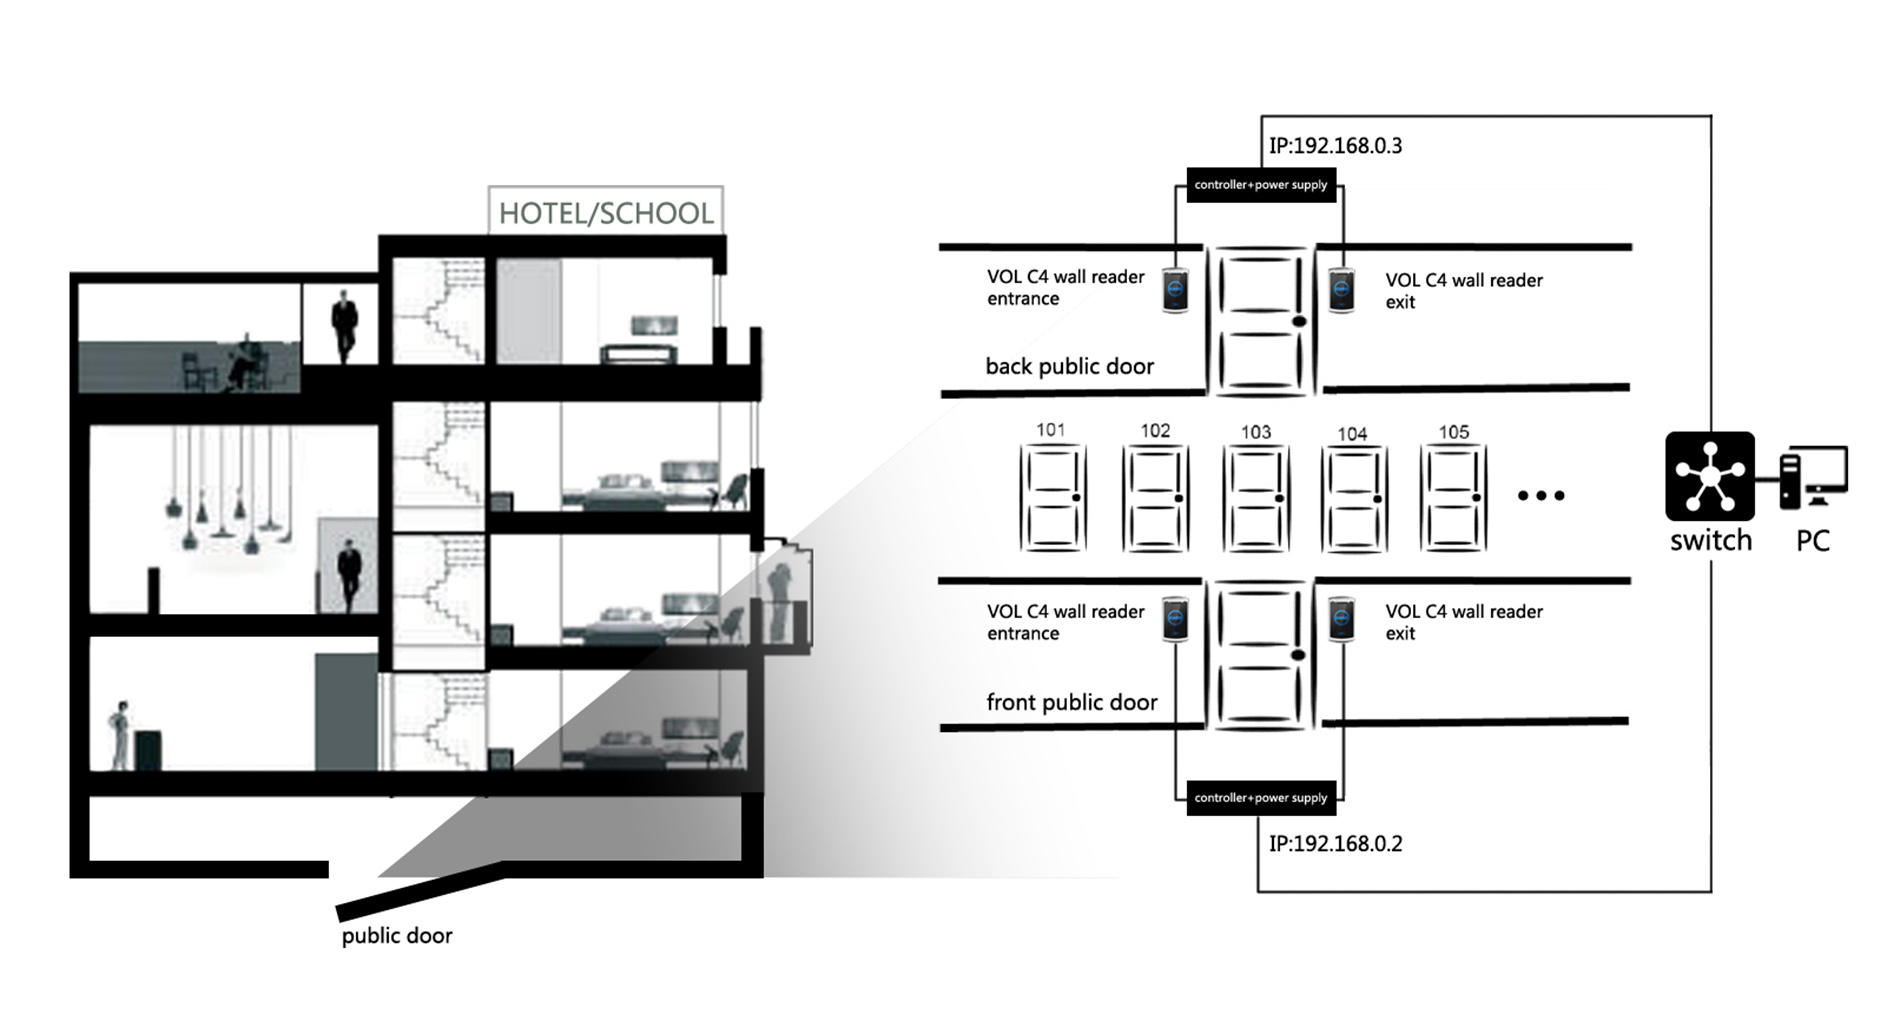 Level remote virtual control system online for apartment